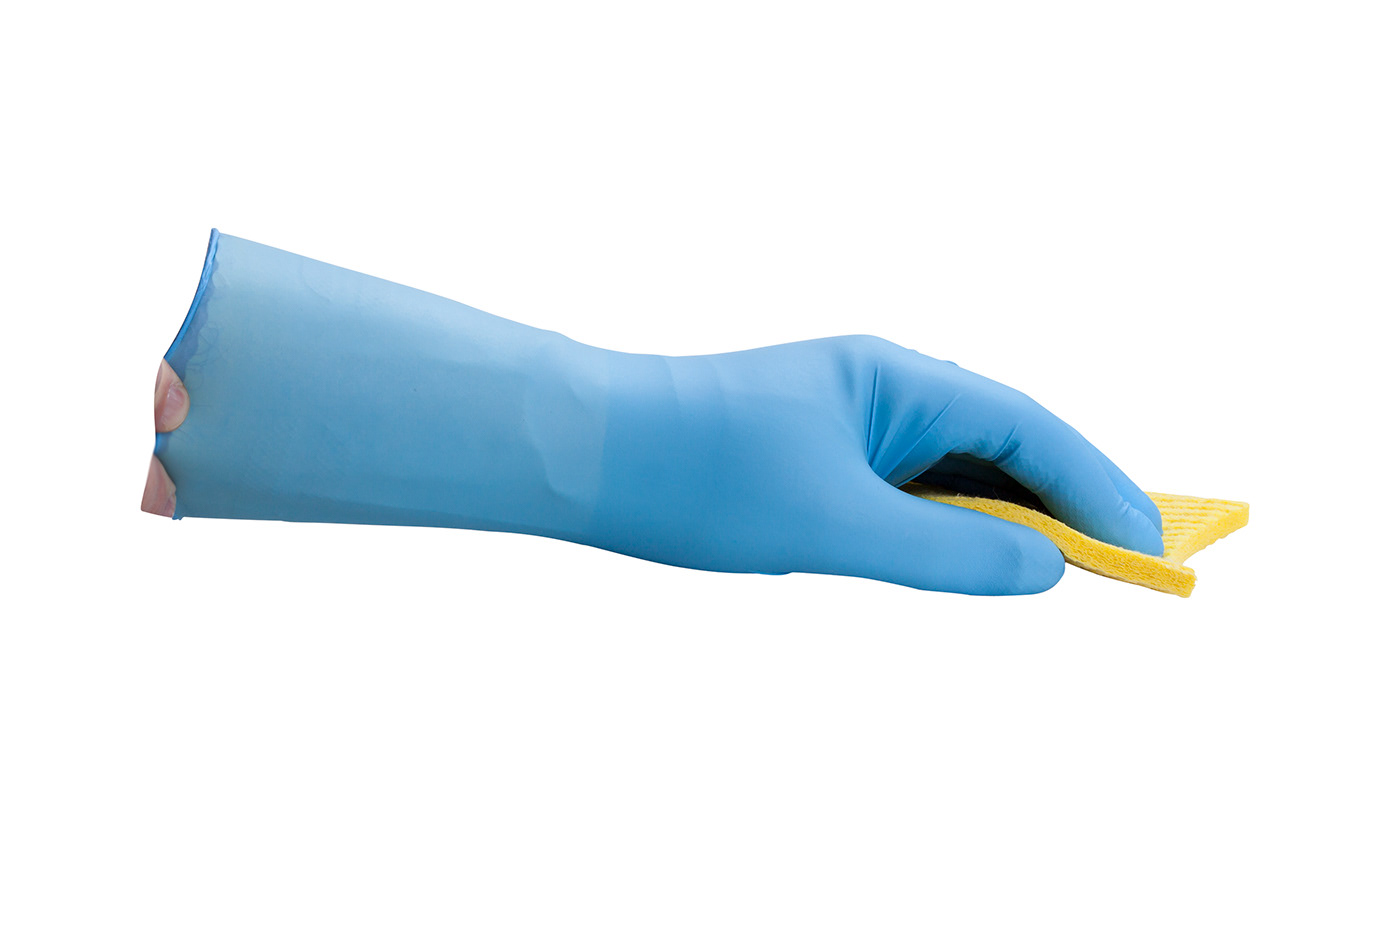 Original photography of blue gloved hand holding yellow sponge.